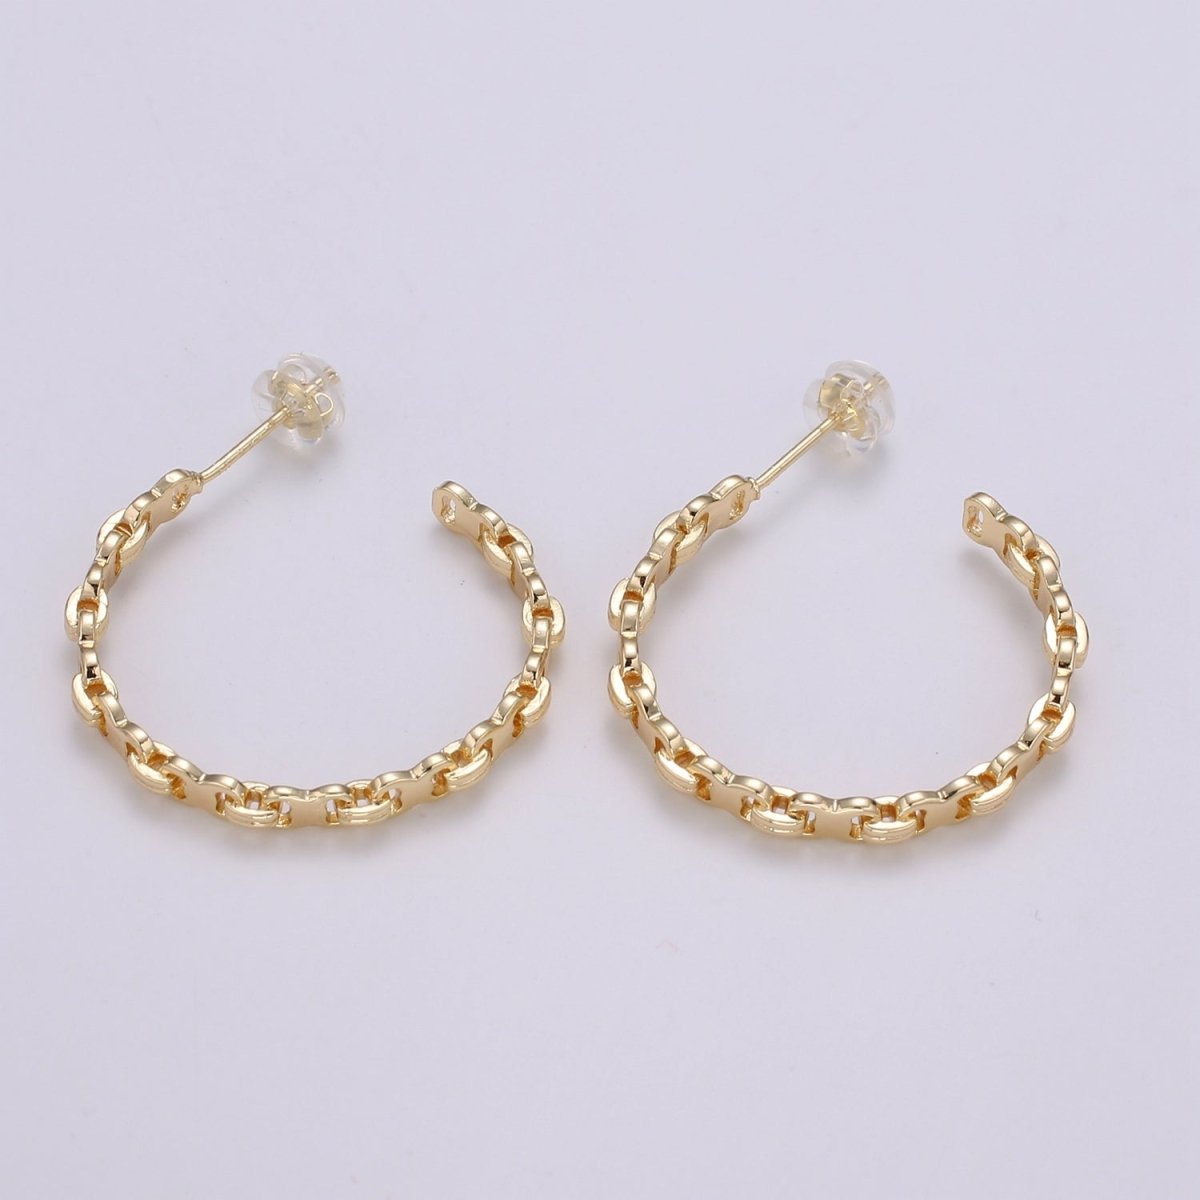 18K Gold Cable Link Chain Hoops Earrings For Wholesale Jewelry Supplies & Earring Findings 28mm hoops Q-457 - DLUXCA